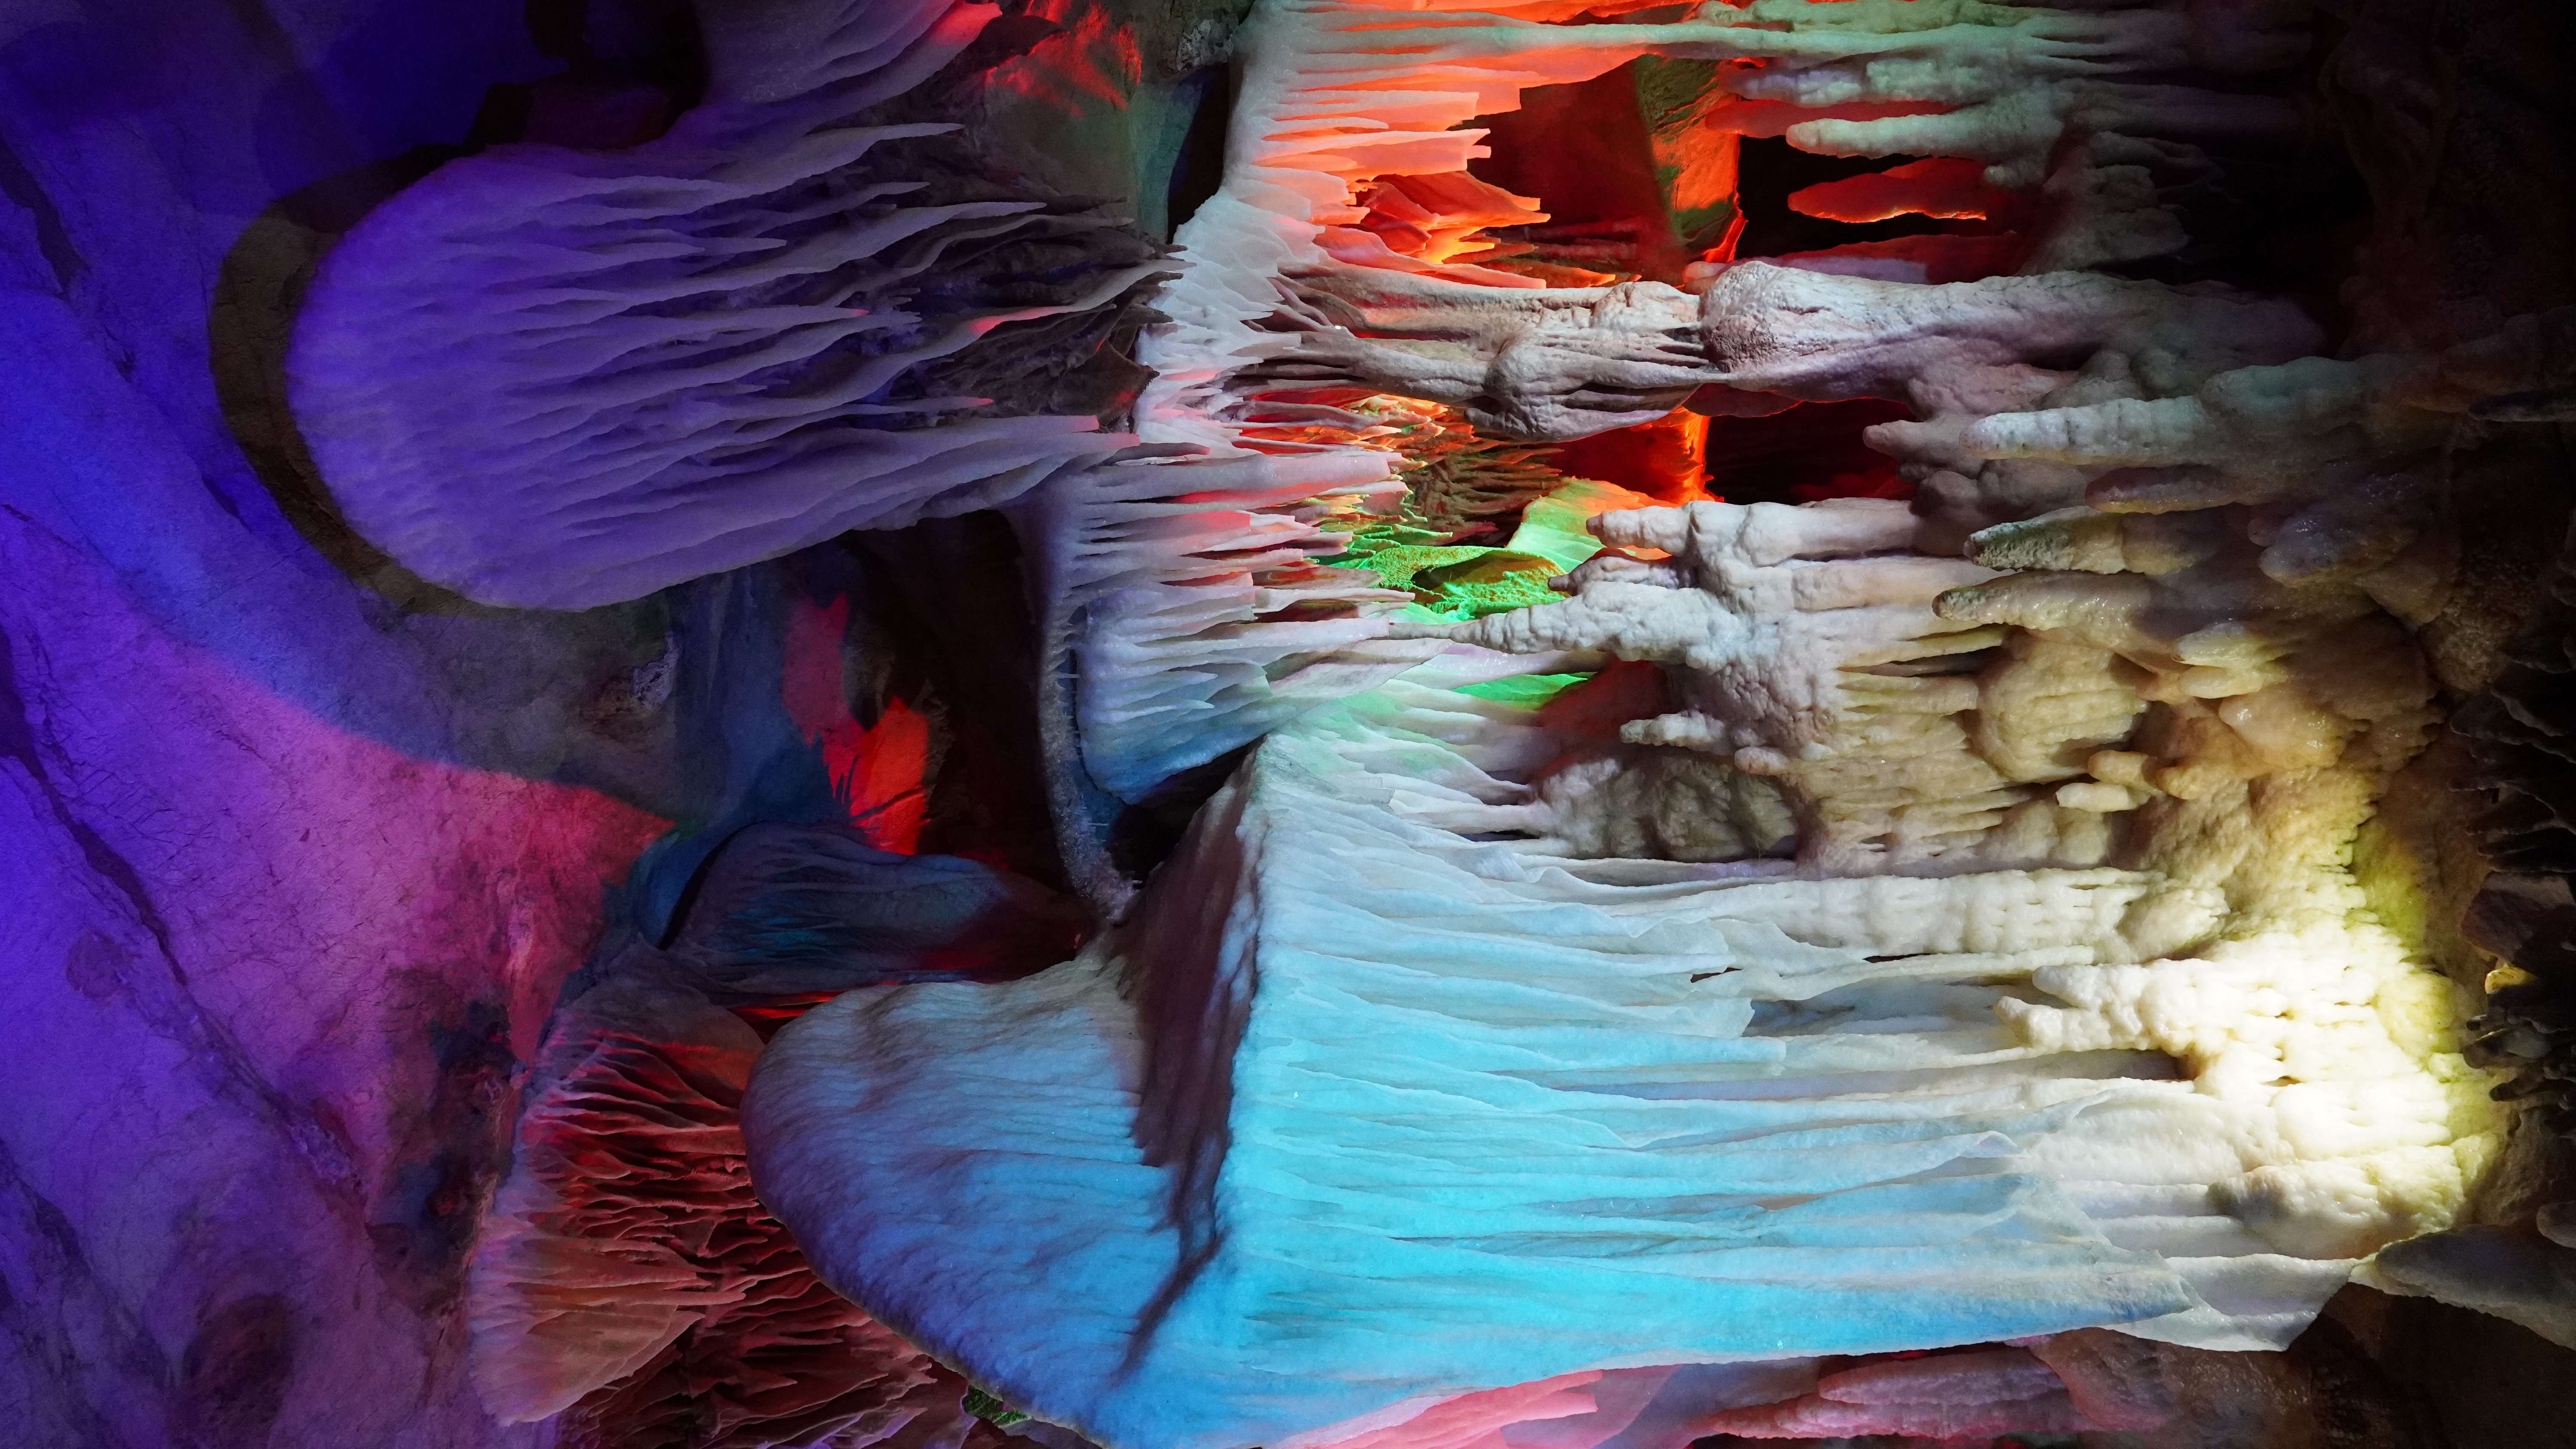 General 6000x3376 cave stalactites portrait display colorful nature